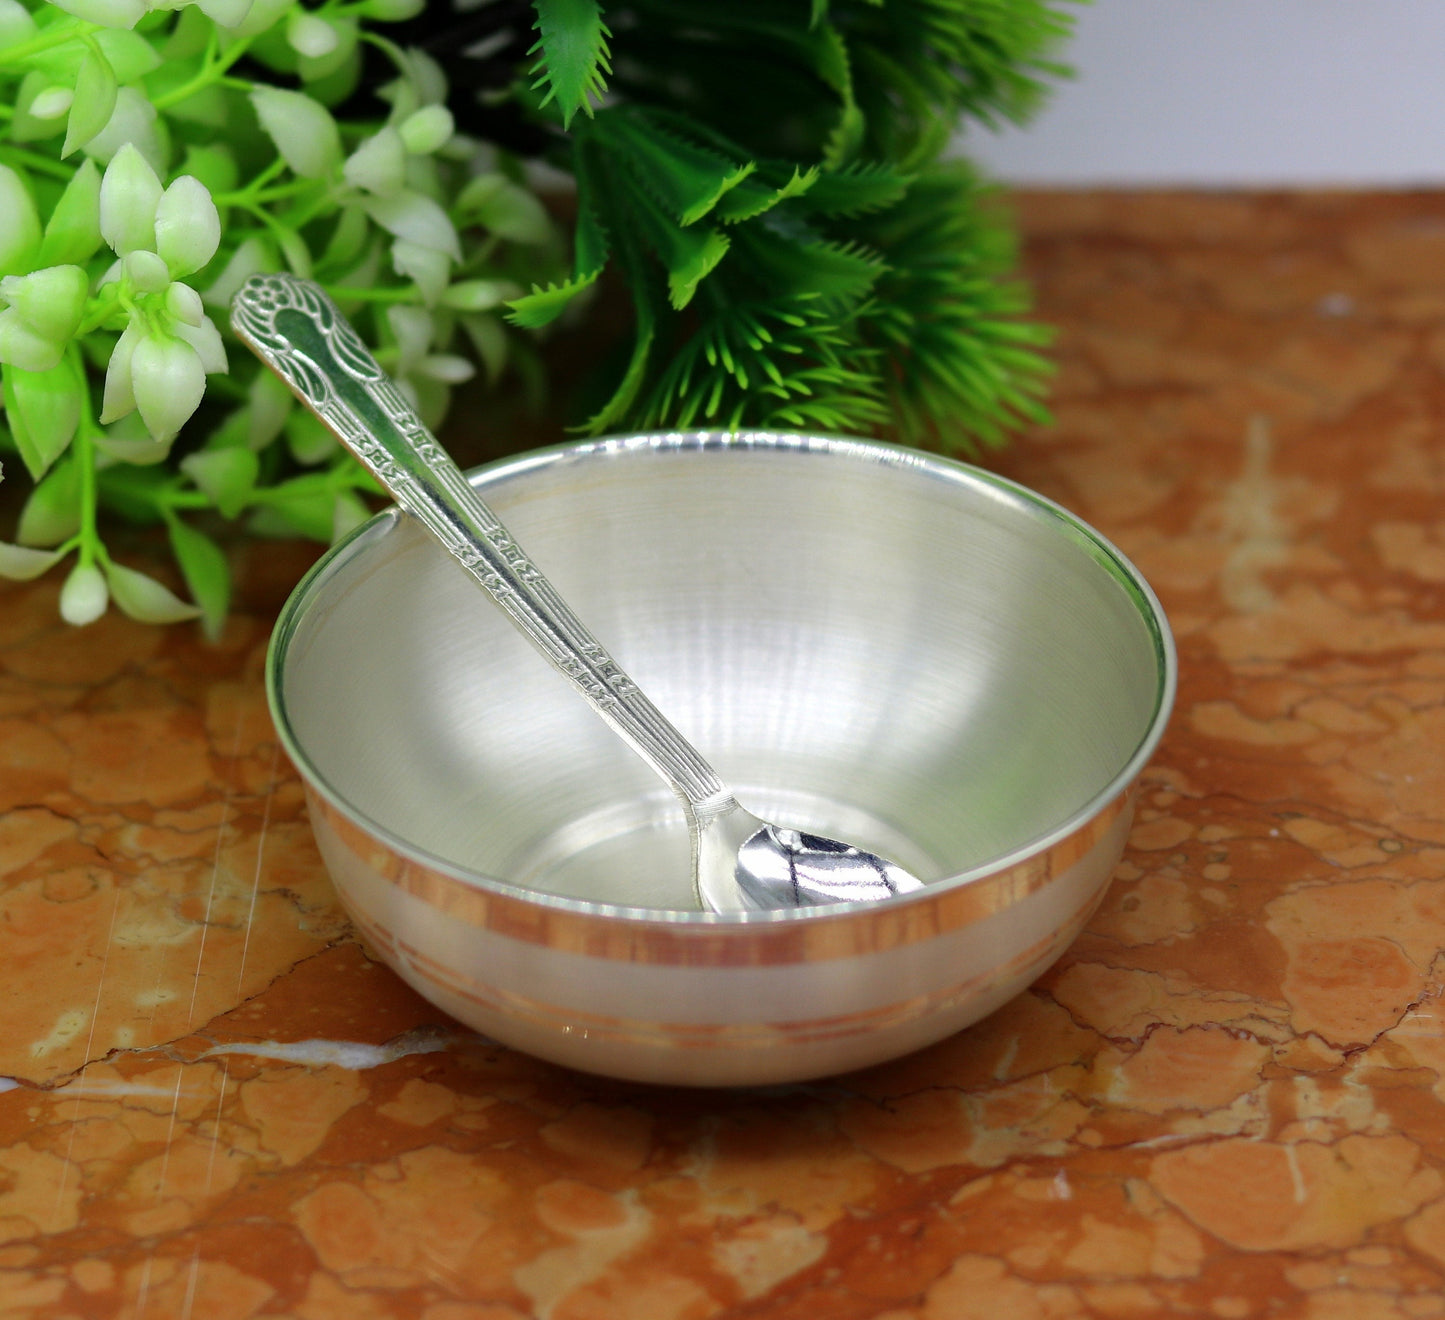 999 pure sterling silver handmade solid silver bowl and spoon, silver has antibacterial properties, keep stay healthy, silver vessels sv65 - TRIBAL ORNAMENTS